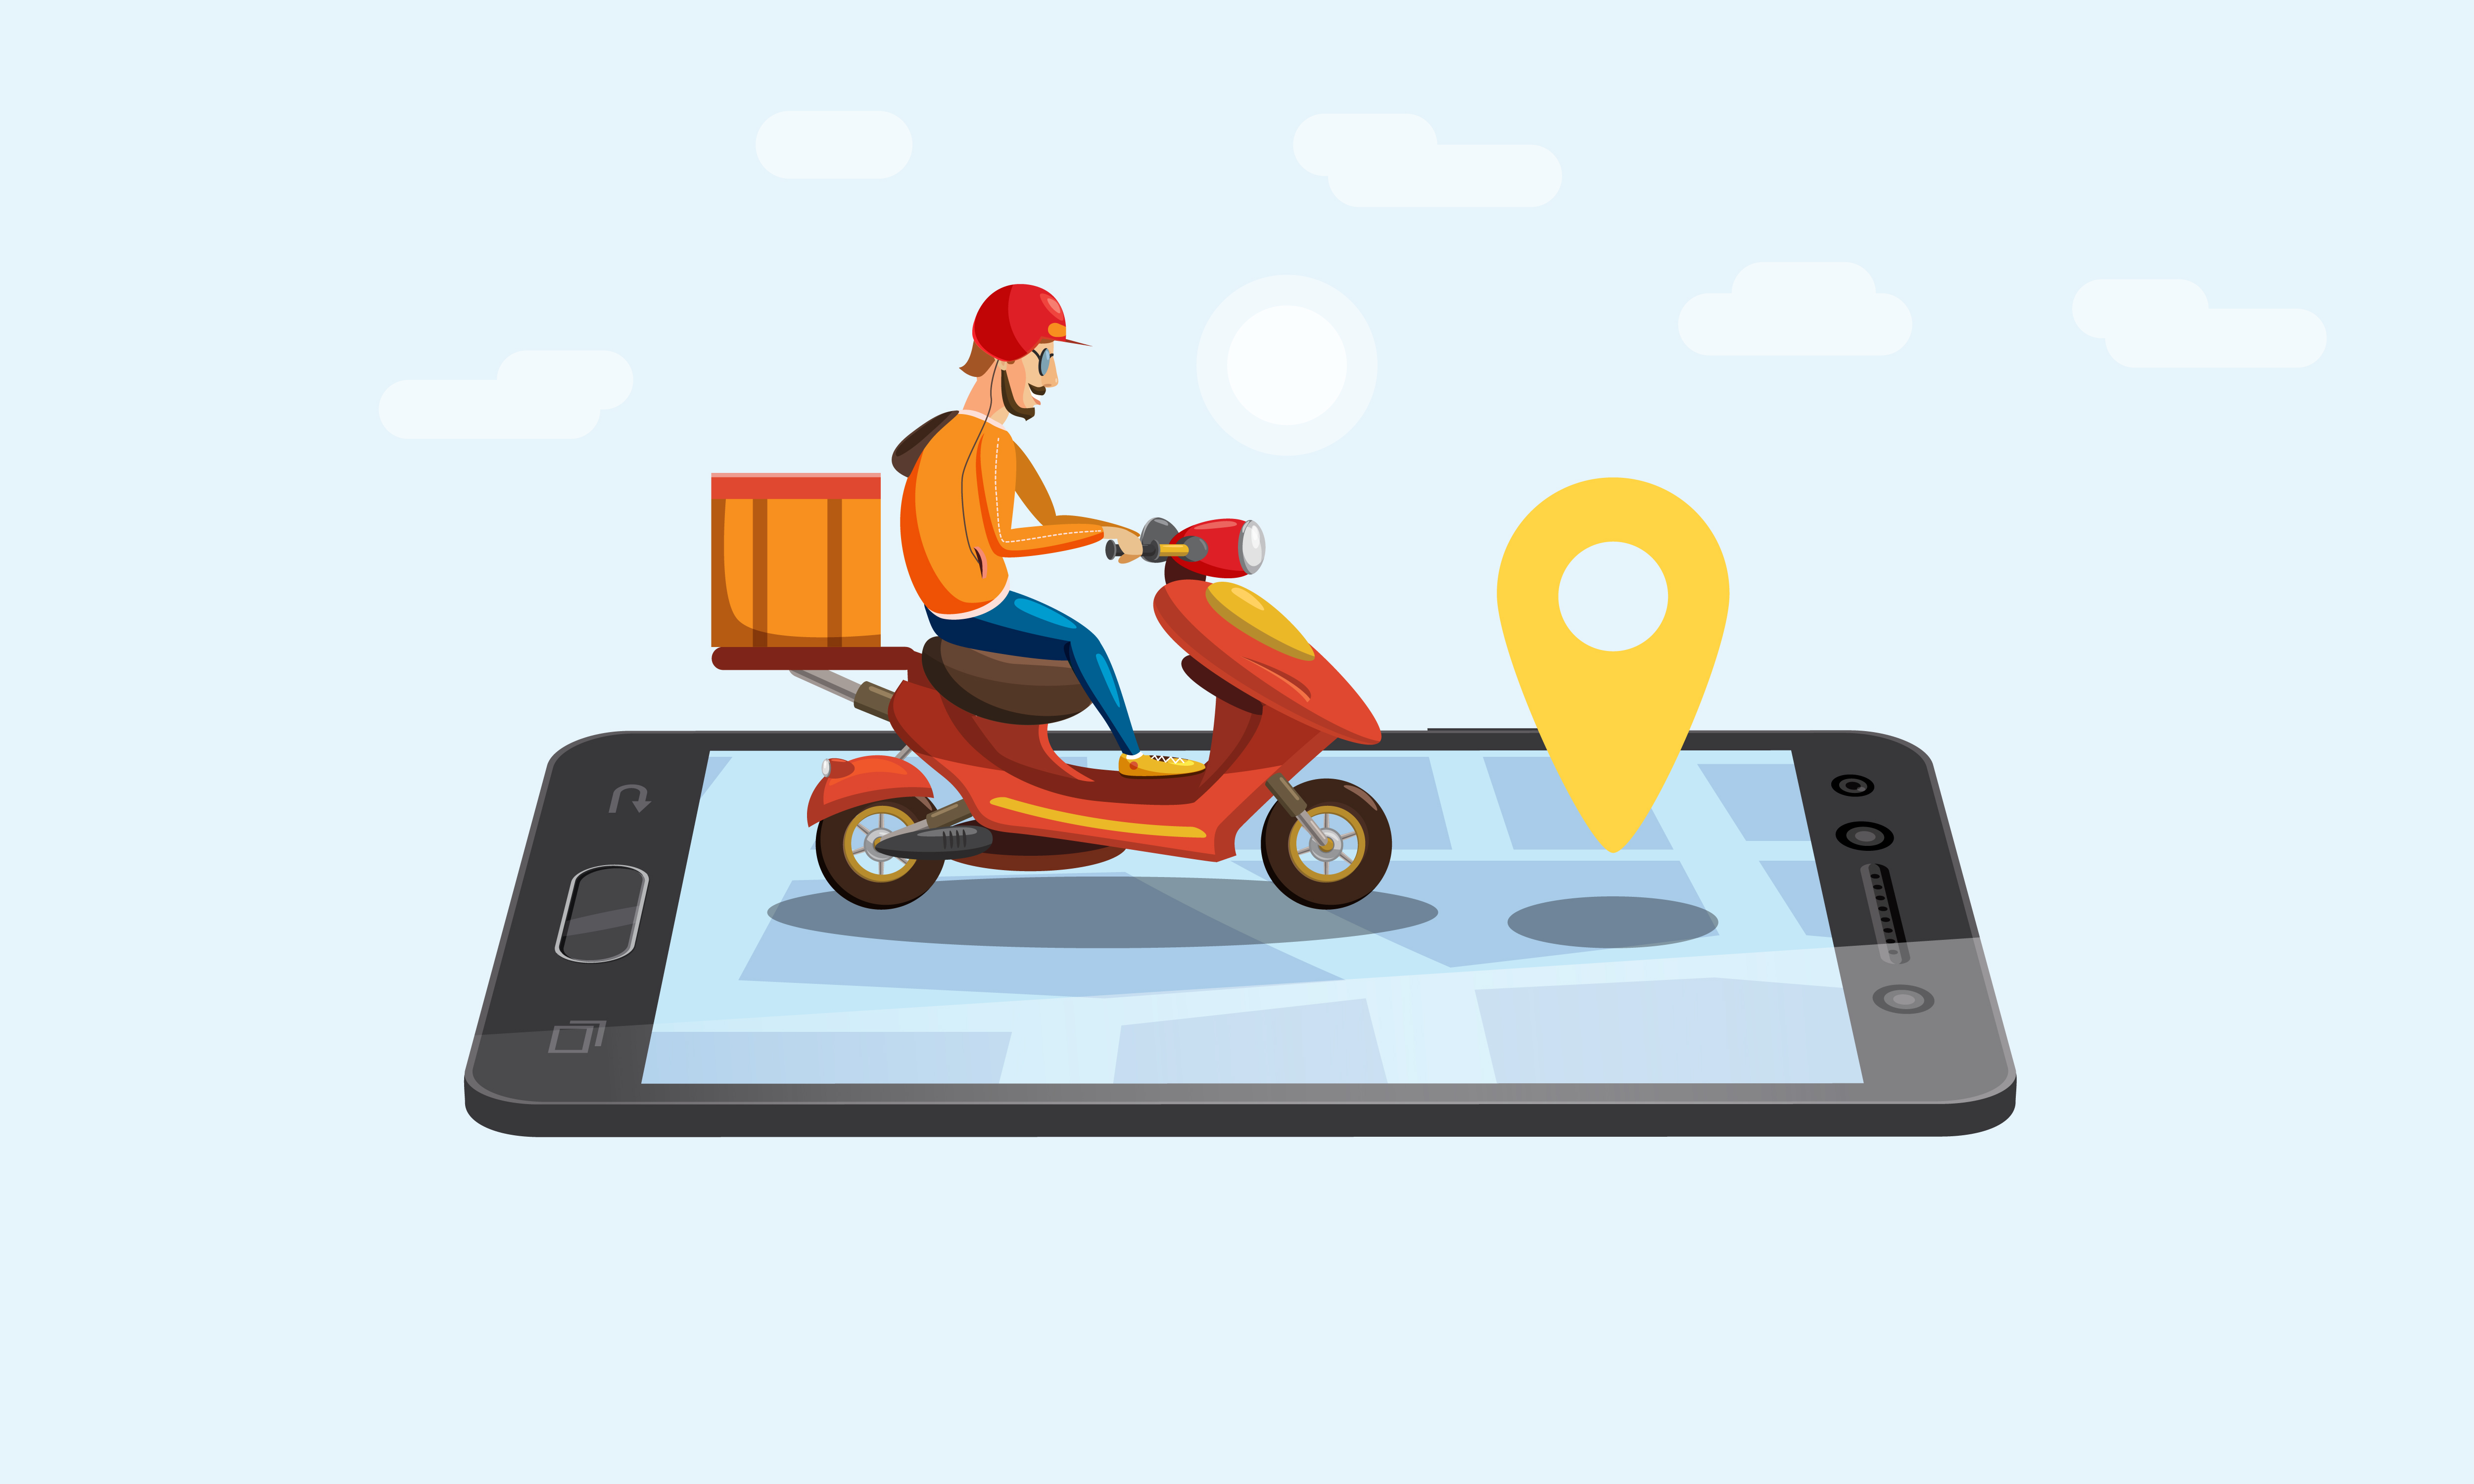 Thai Siam Commercial Bank launches new food delivery platform